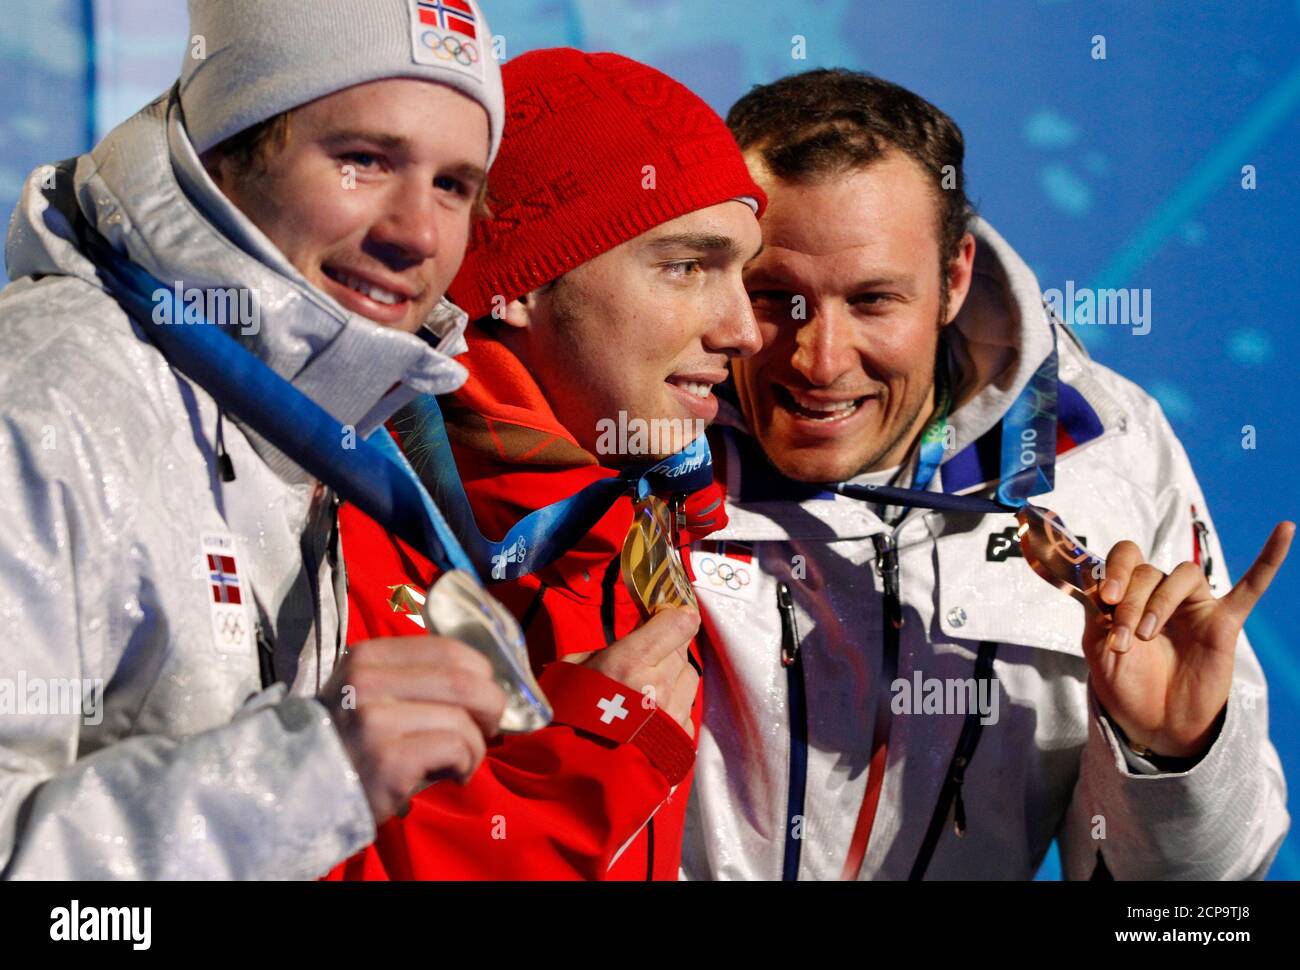 Gold medallist Carlo Janka (C) of Switzerland poses with silver medallist Kjetil Jansrud (L) and bronze medallist Aksel Lund Svindal of Norway during the medal ceremony for the men's Alpine skiing giant slalom competition at the Vancouver 2010 Winter Olympics, in Whistler, British Columbia, February 23, 2010. REUTERS/Stefan Wermuth (CANADA) Foto Stock